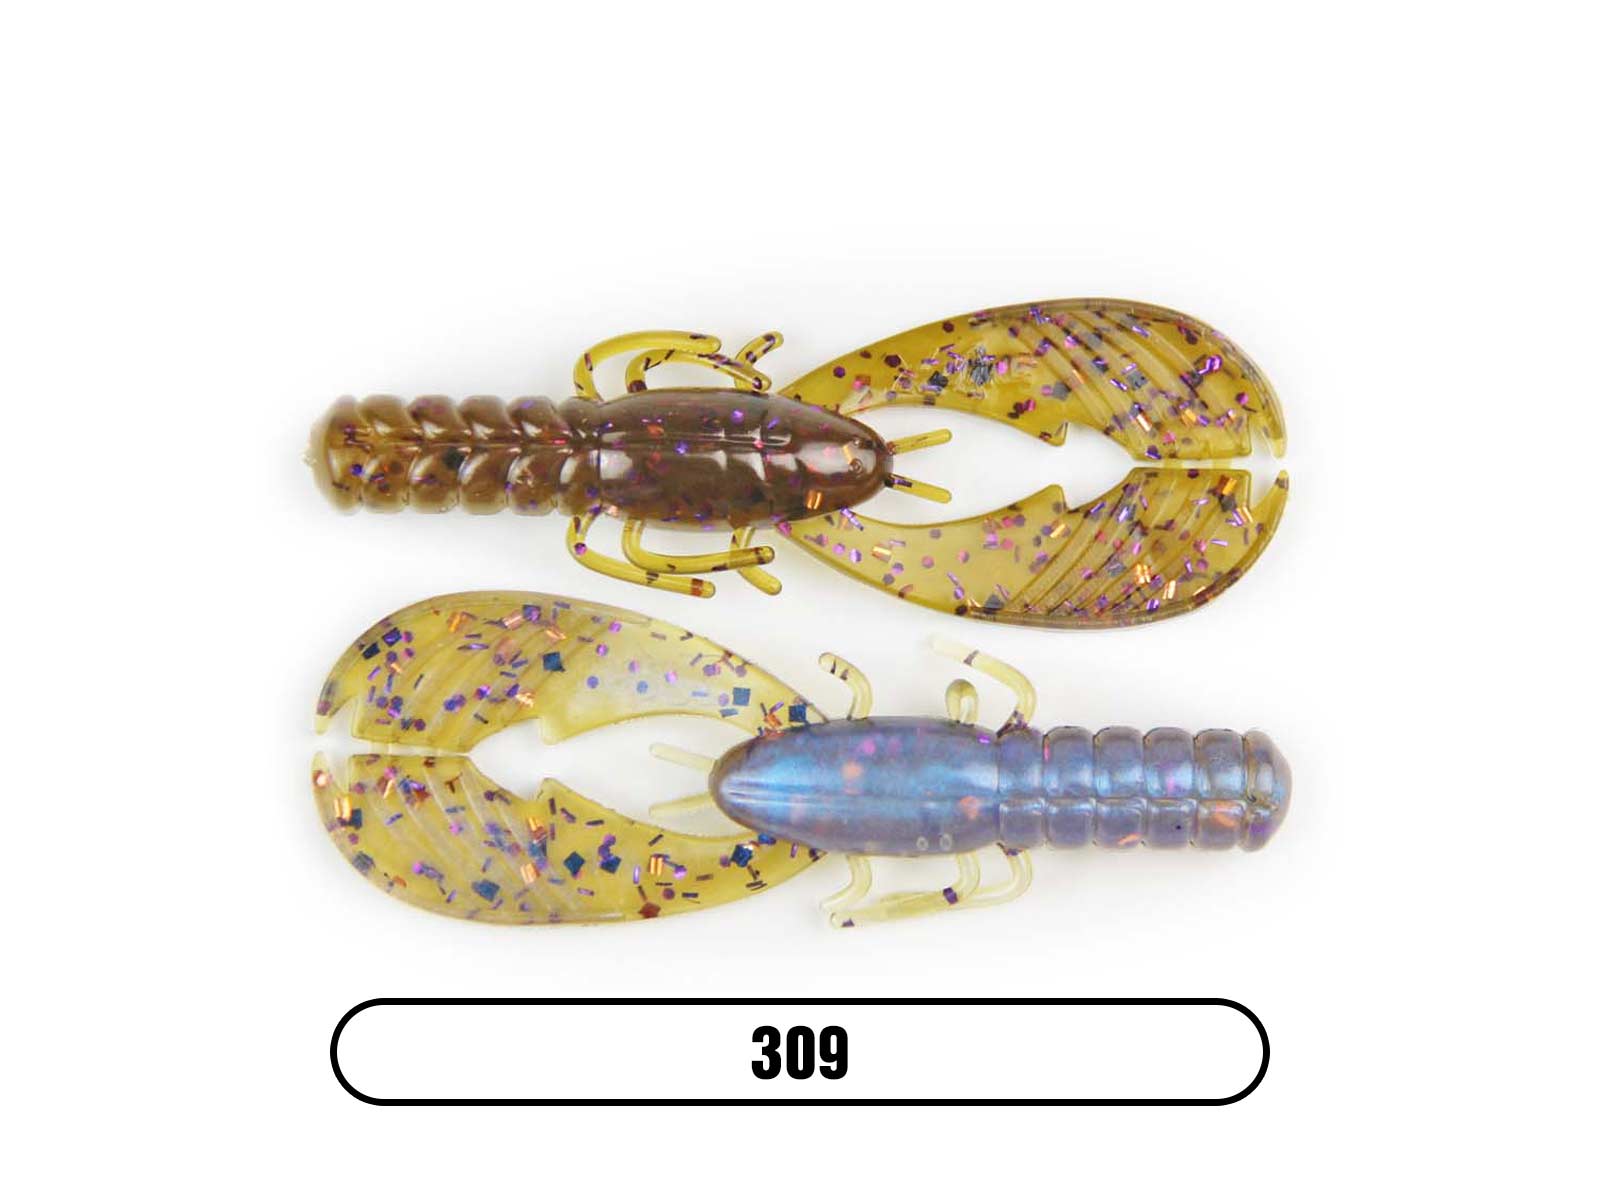 http://xzonelures.com/cdn/shop/products/10309-Muscle-Back-Craw-4-inch-309.jpg?v=1690314702